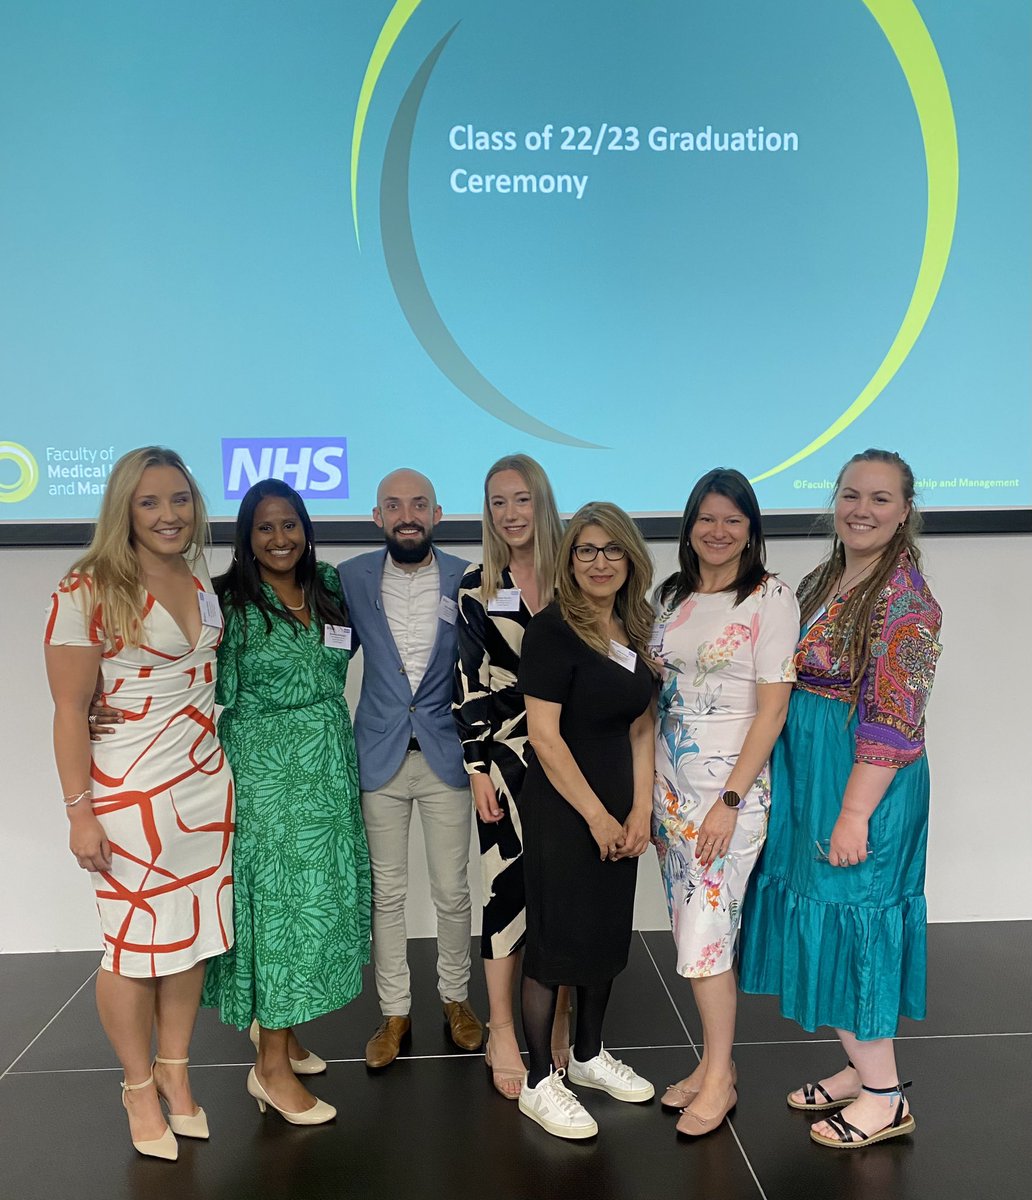 Huge congrats to our 7 London Region Clinical Fellows. It has been a privilege to watch your growth and development. Thank you for all of your hard work. The NHS is lucky to have such such motivated and inspirational leaders. @NHSEnglandLDN @FMLM_UK @JaneJaneclegg @ChetnaModi3